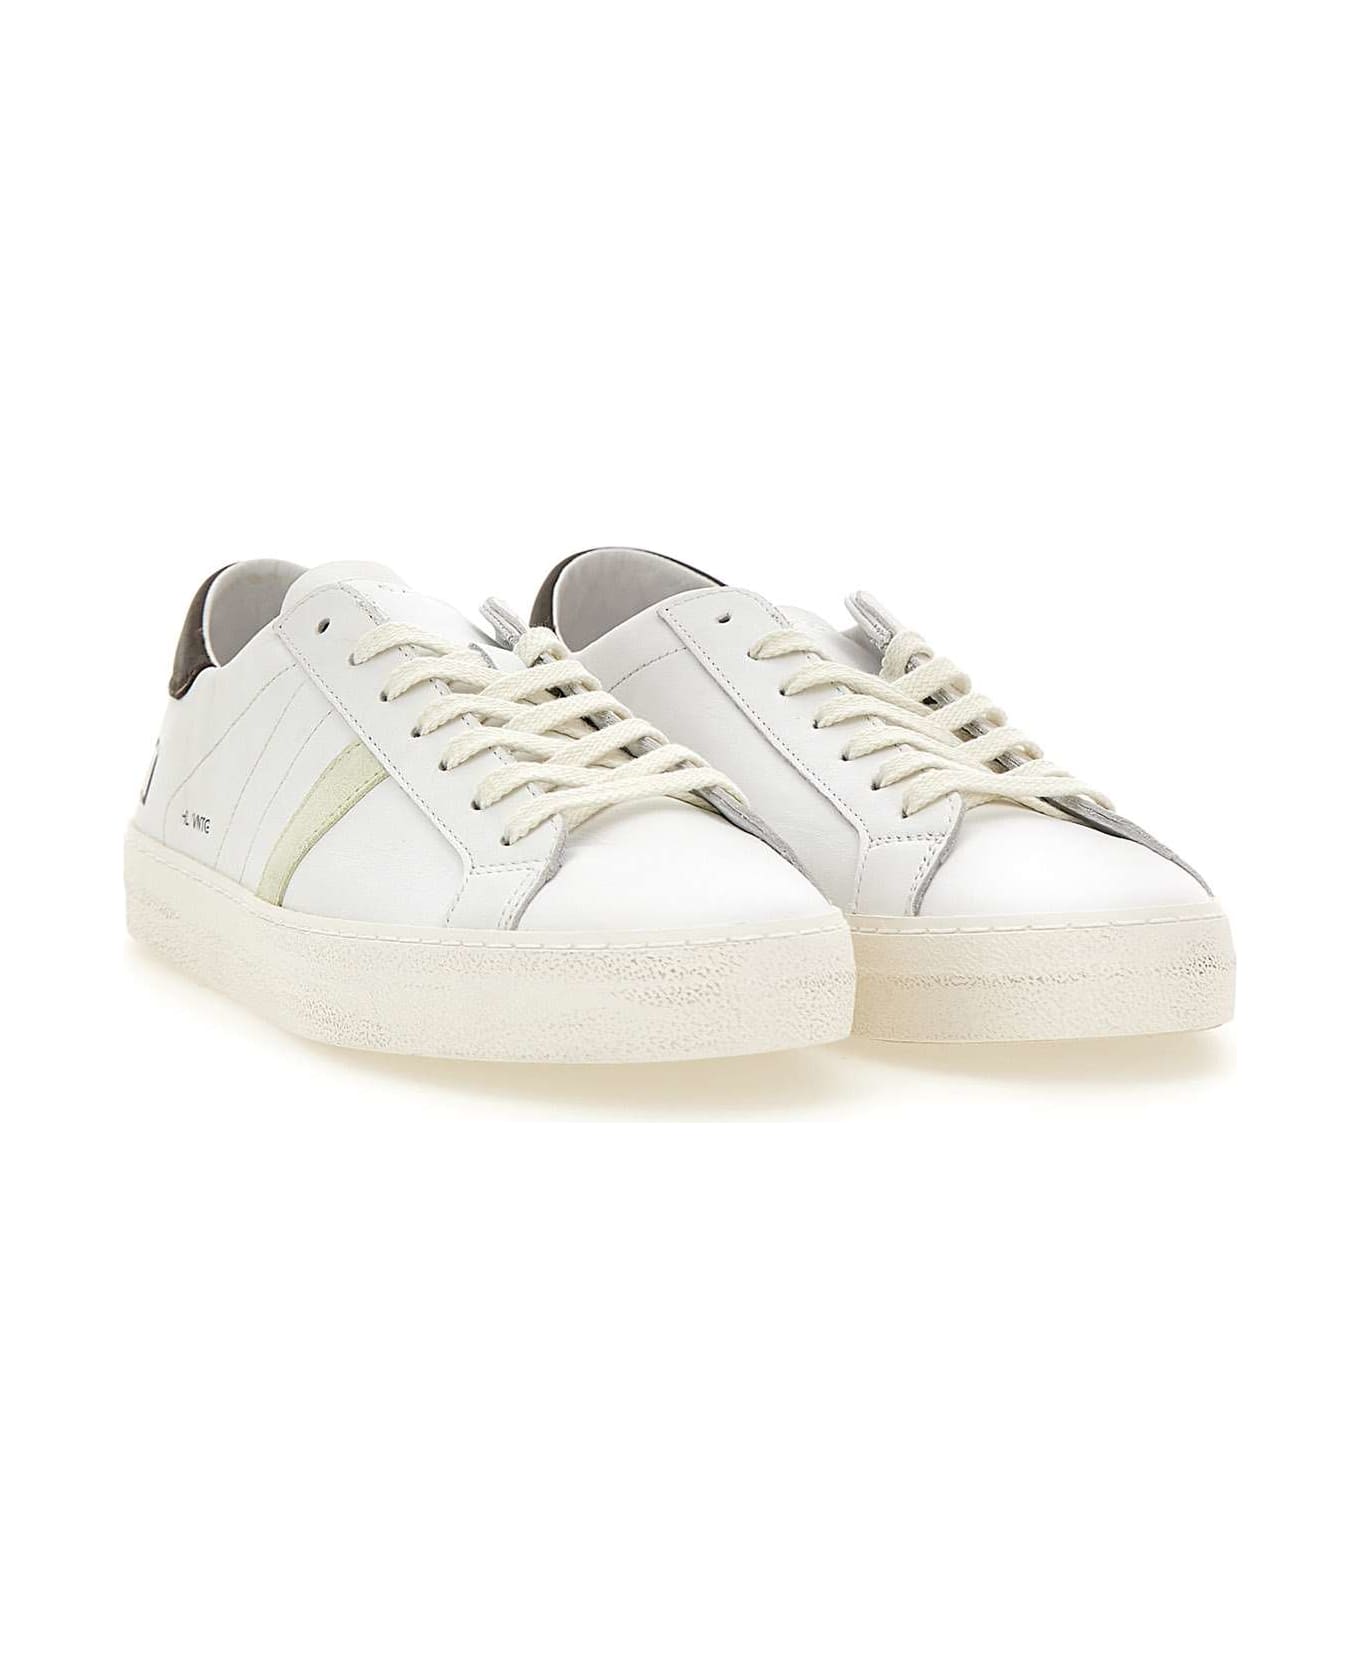 D.A.T.E. "hillow Vintage Calf" Leather Sneakers - WHITE スニーカー